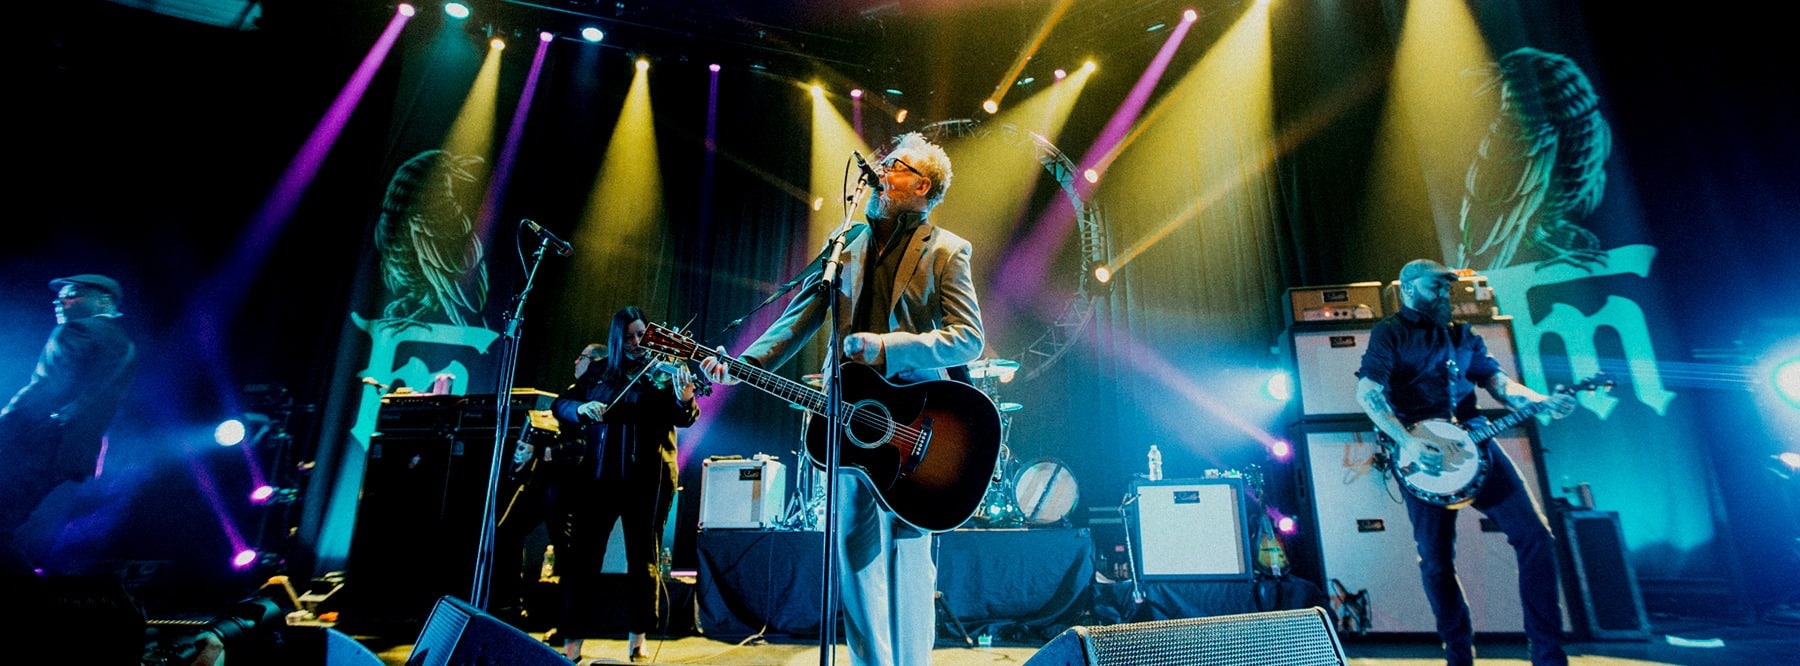 Flogging Molly Frontman Dave King Has Advice For Aspiring Writers